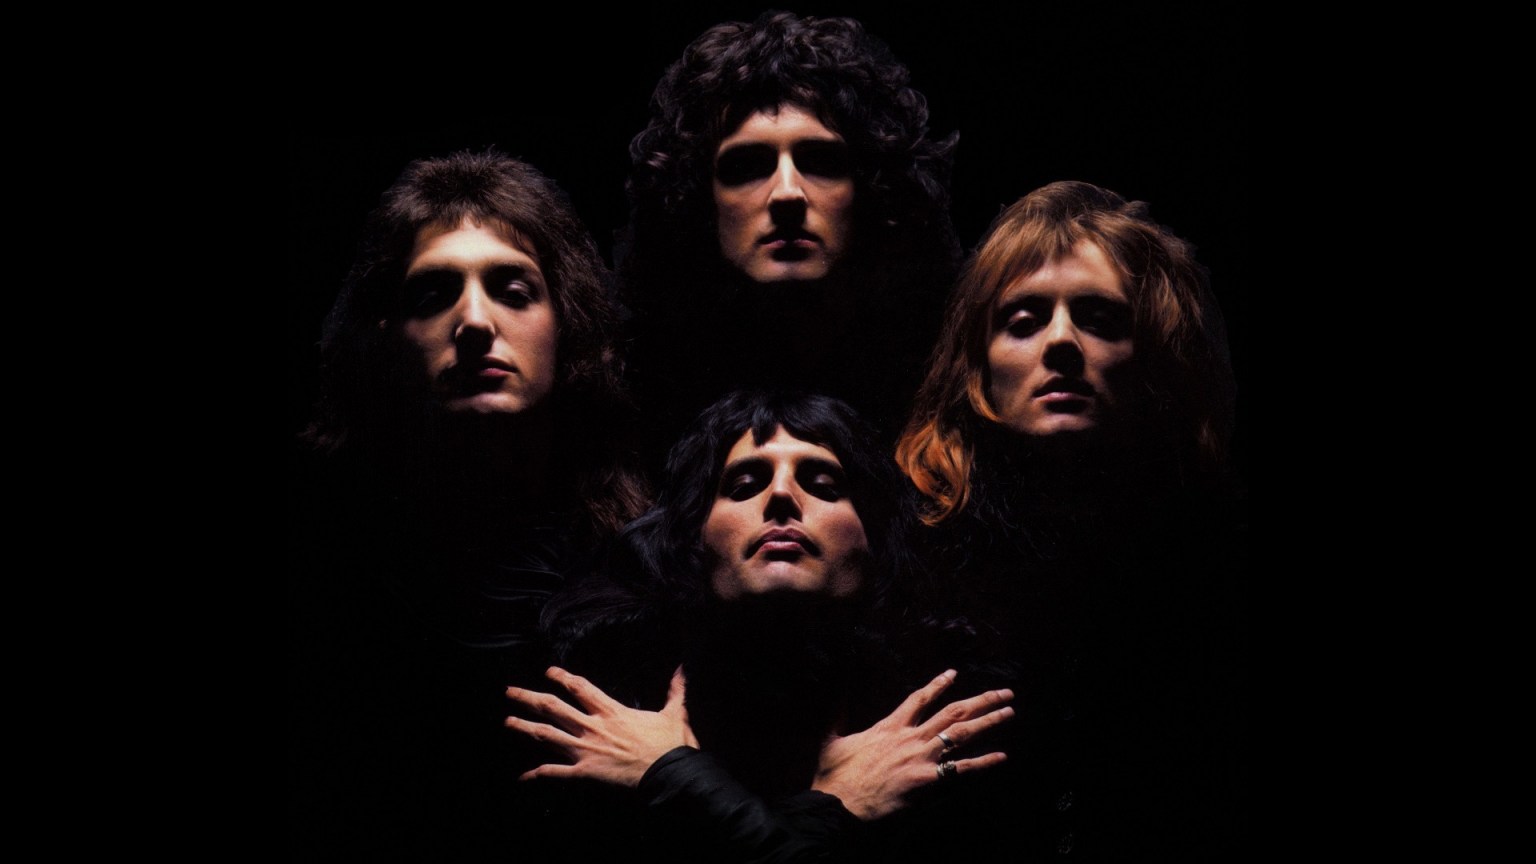 Queen for 1536 x 864 HDTV resolution